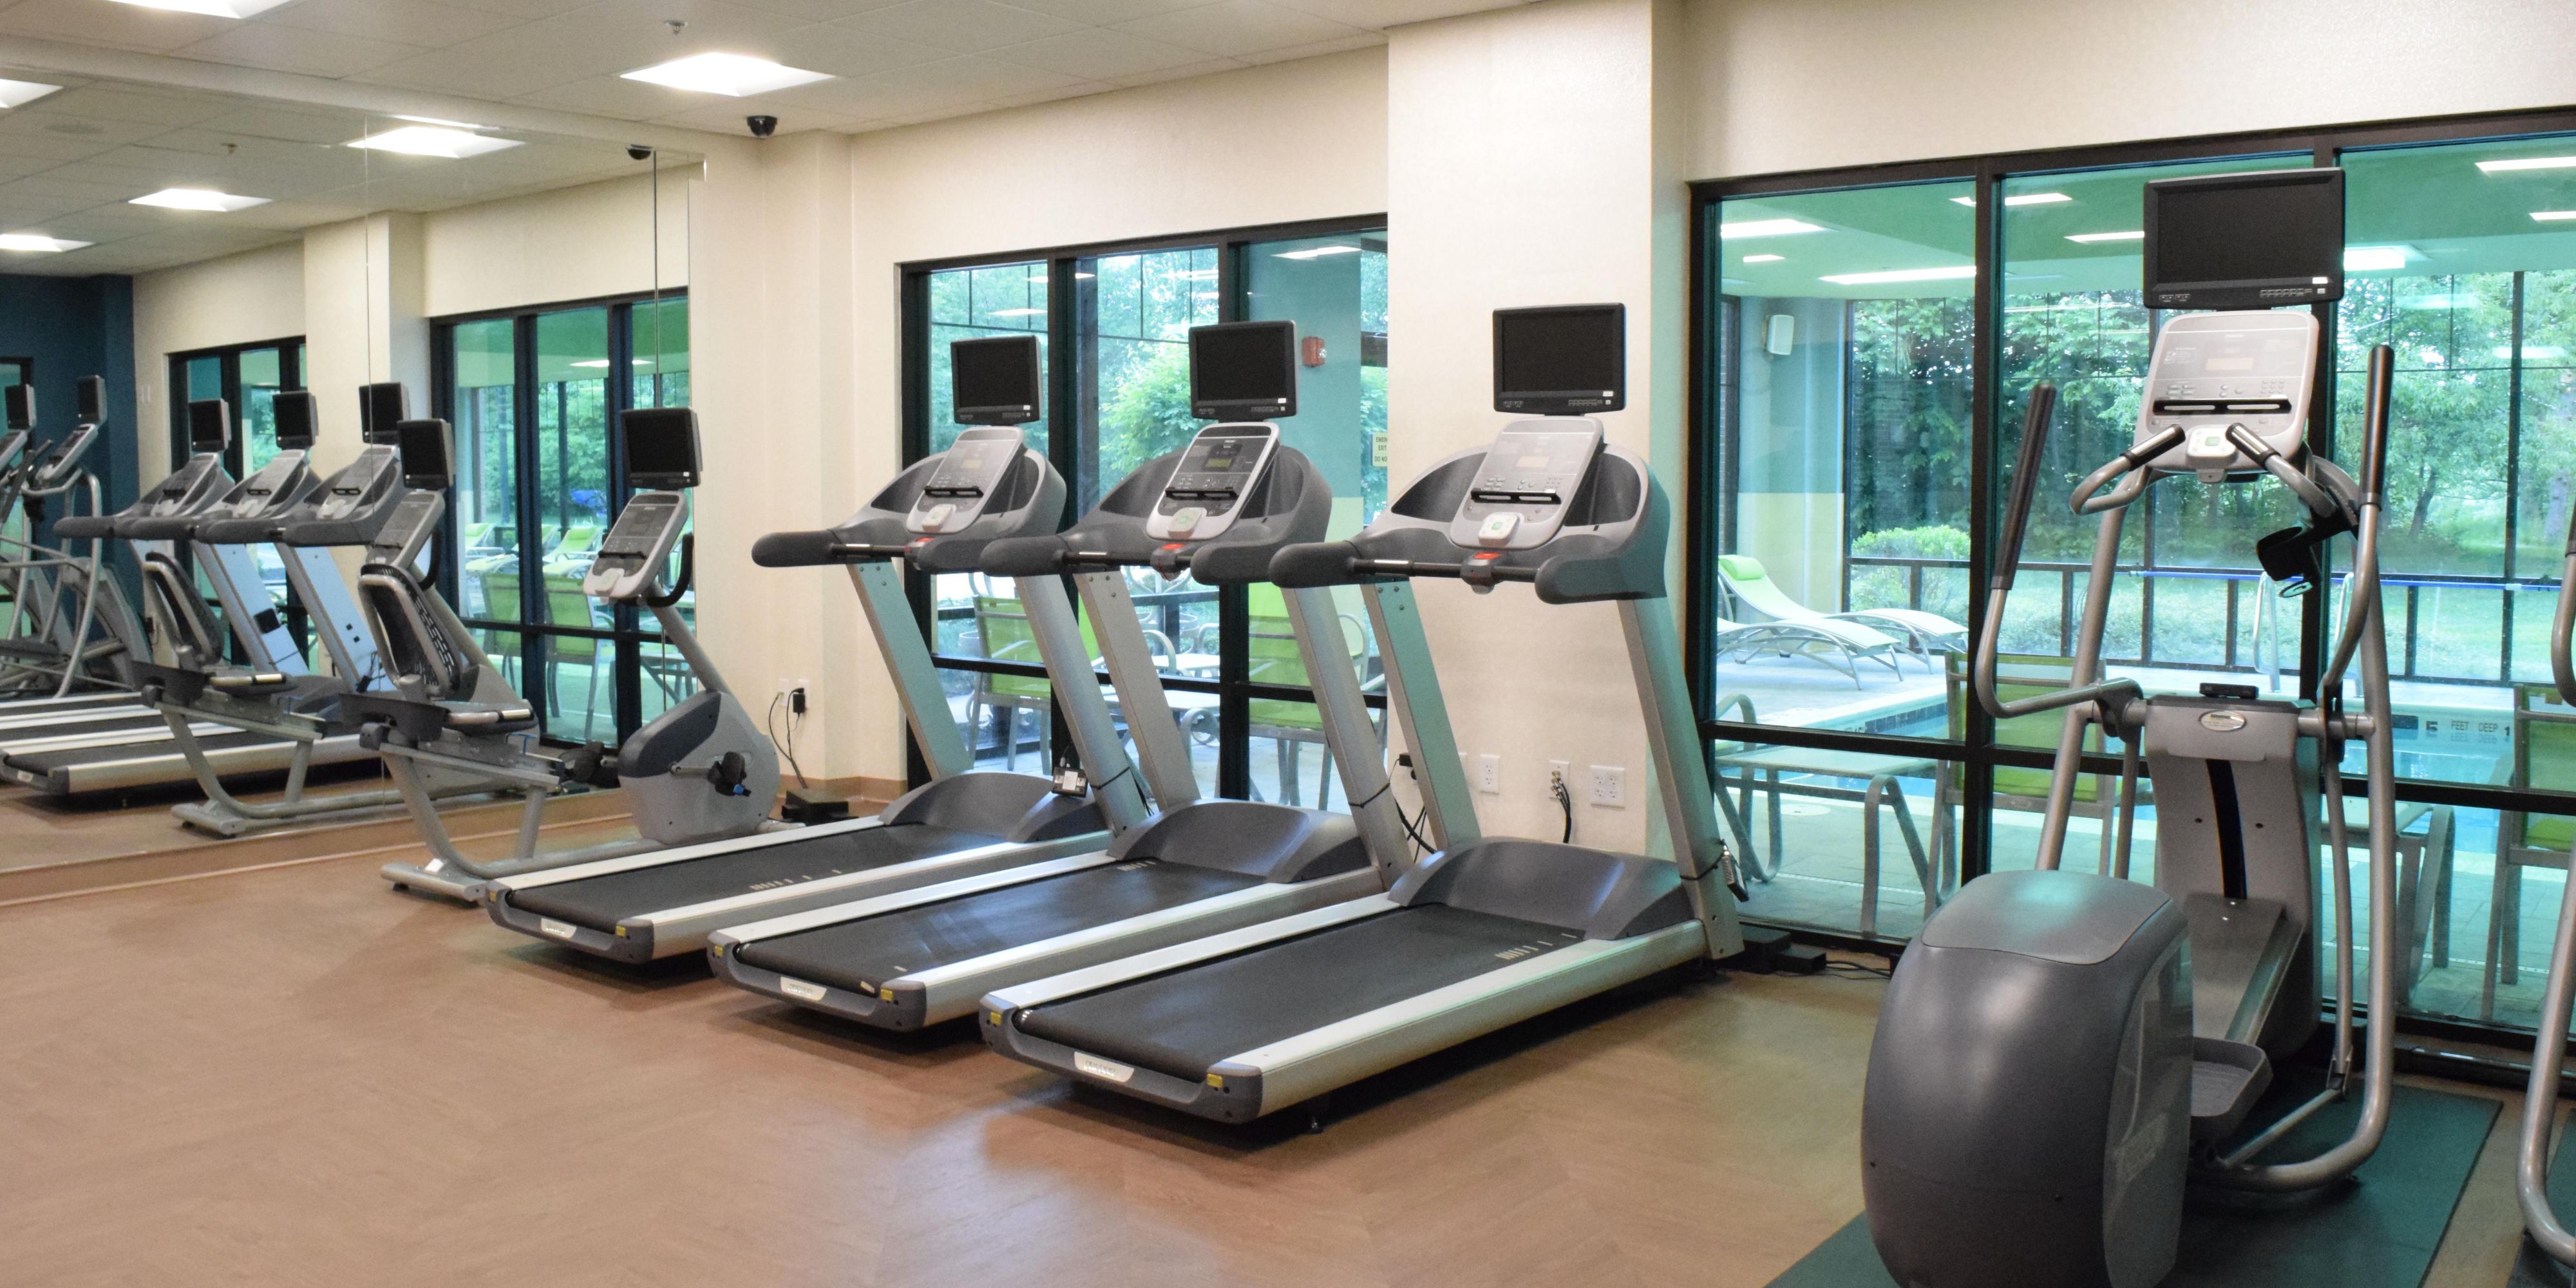 Keep your workout routine intact with our fully equipped 24/7 Fitness Center featuring cardio equipment and free weights. If the weather permits, venture to North Ponds Park, in our backyard, to take advantage of their trails. Relax your muscles in our indoor heated pool and whirlpool spa.